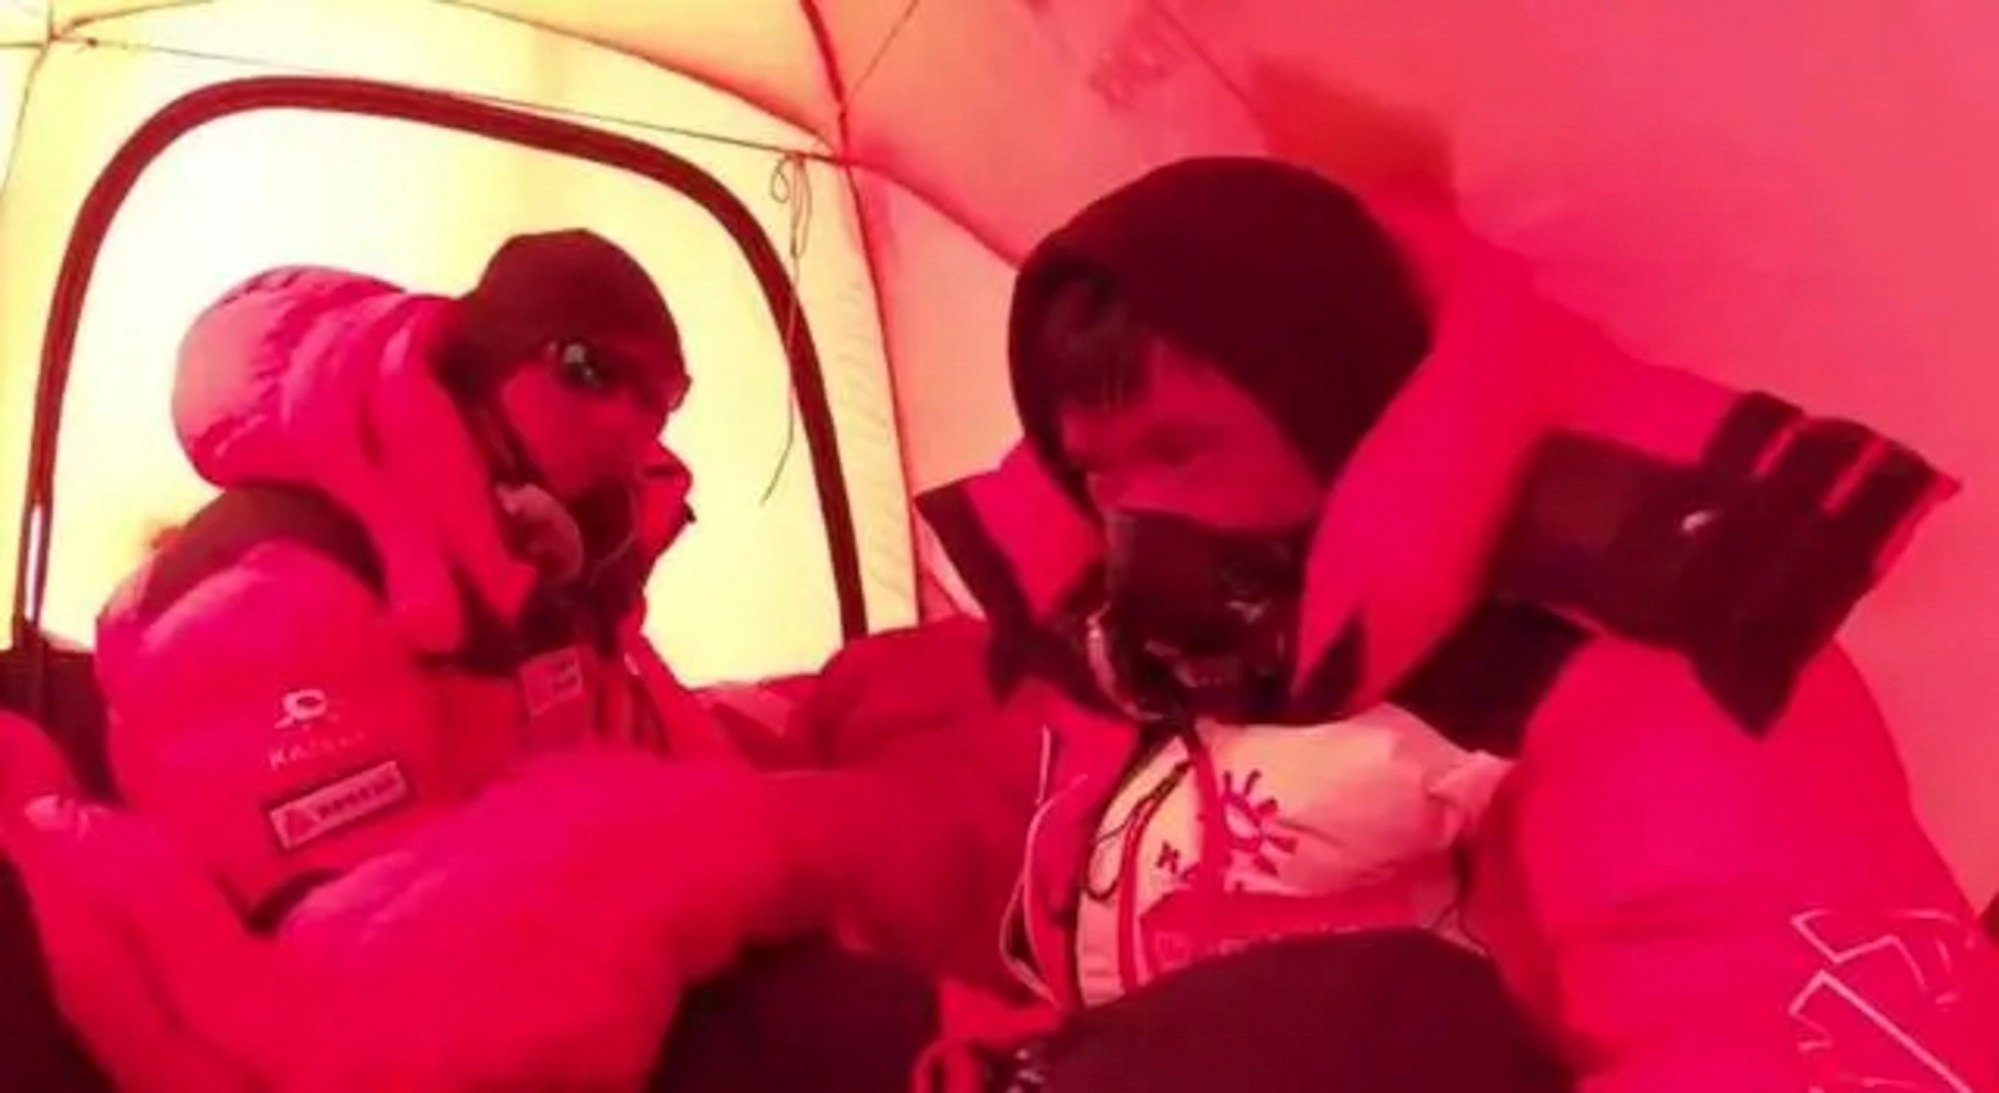 “Ascending to the top of Everest is our dream, but it can’t be compared with life,” says Xie after helping save the woman. Photo: Hunan Provincial Mountaineering Team